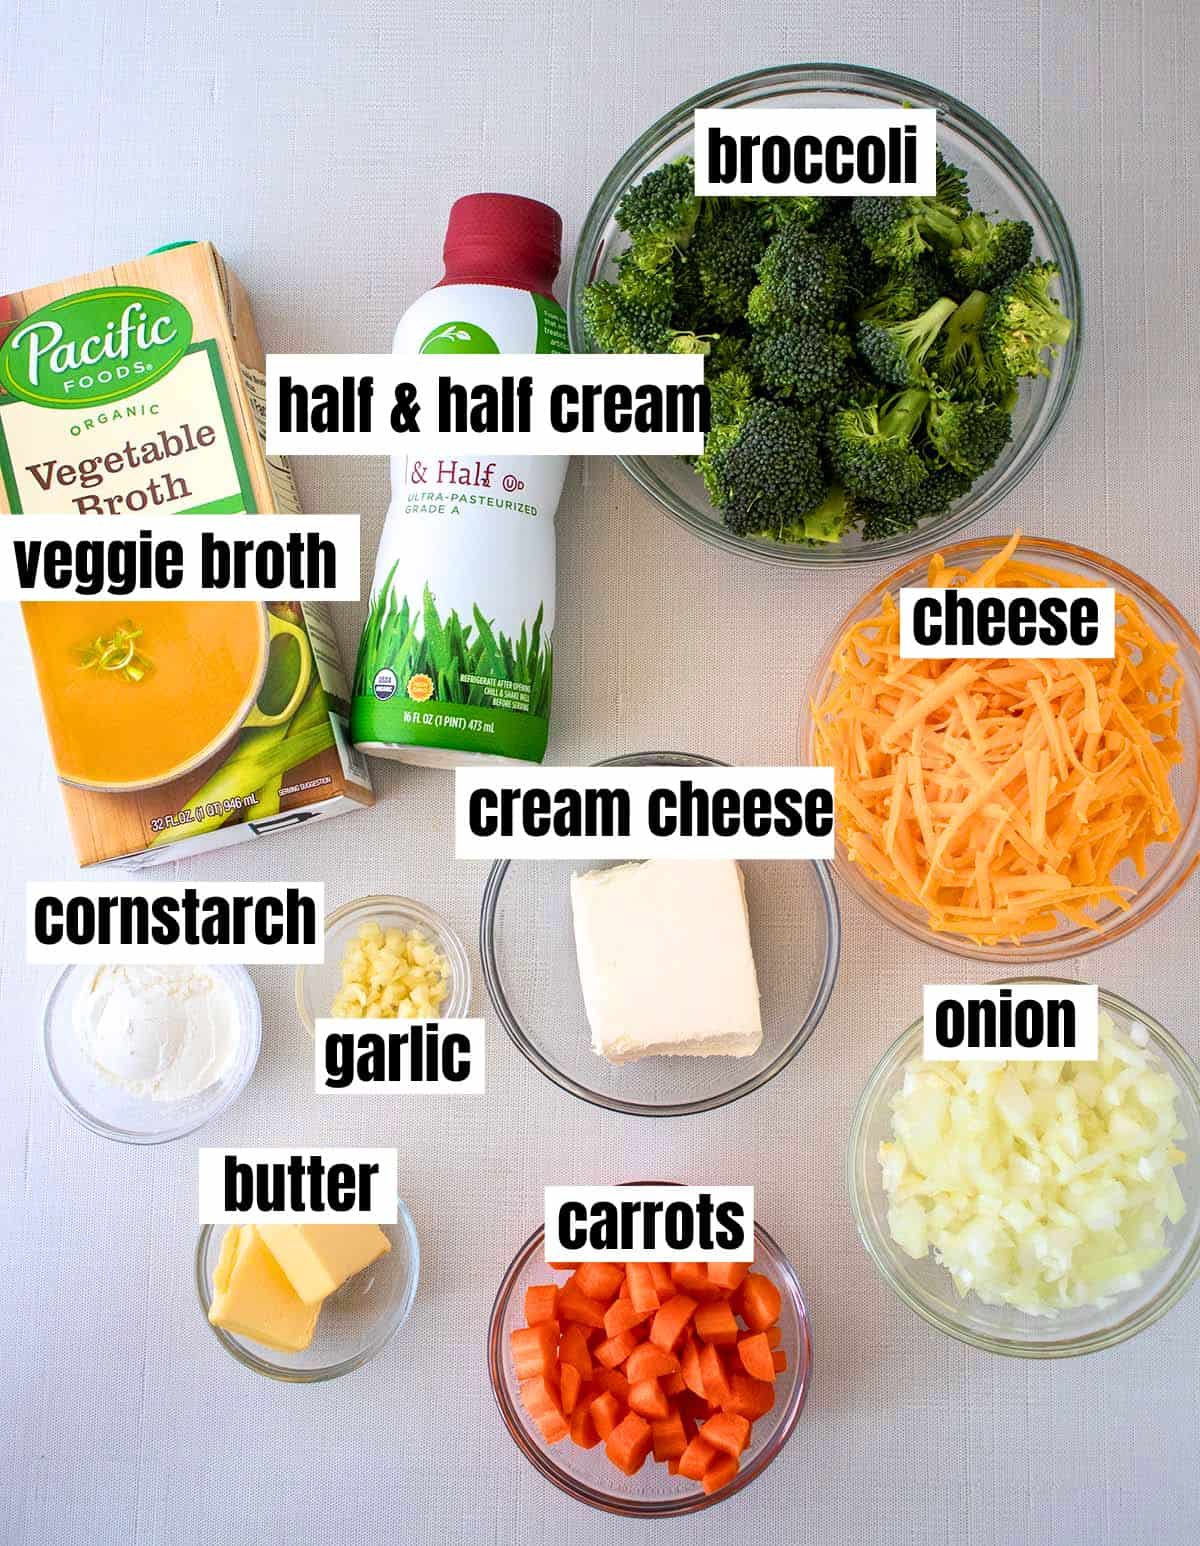 Ingredients for easy broccoli cheddar soup which include vegetable broth, half & half cream, broccoli, cheese, cream cheese, cornstarch, garlic, onion, butter and carrots.